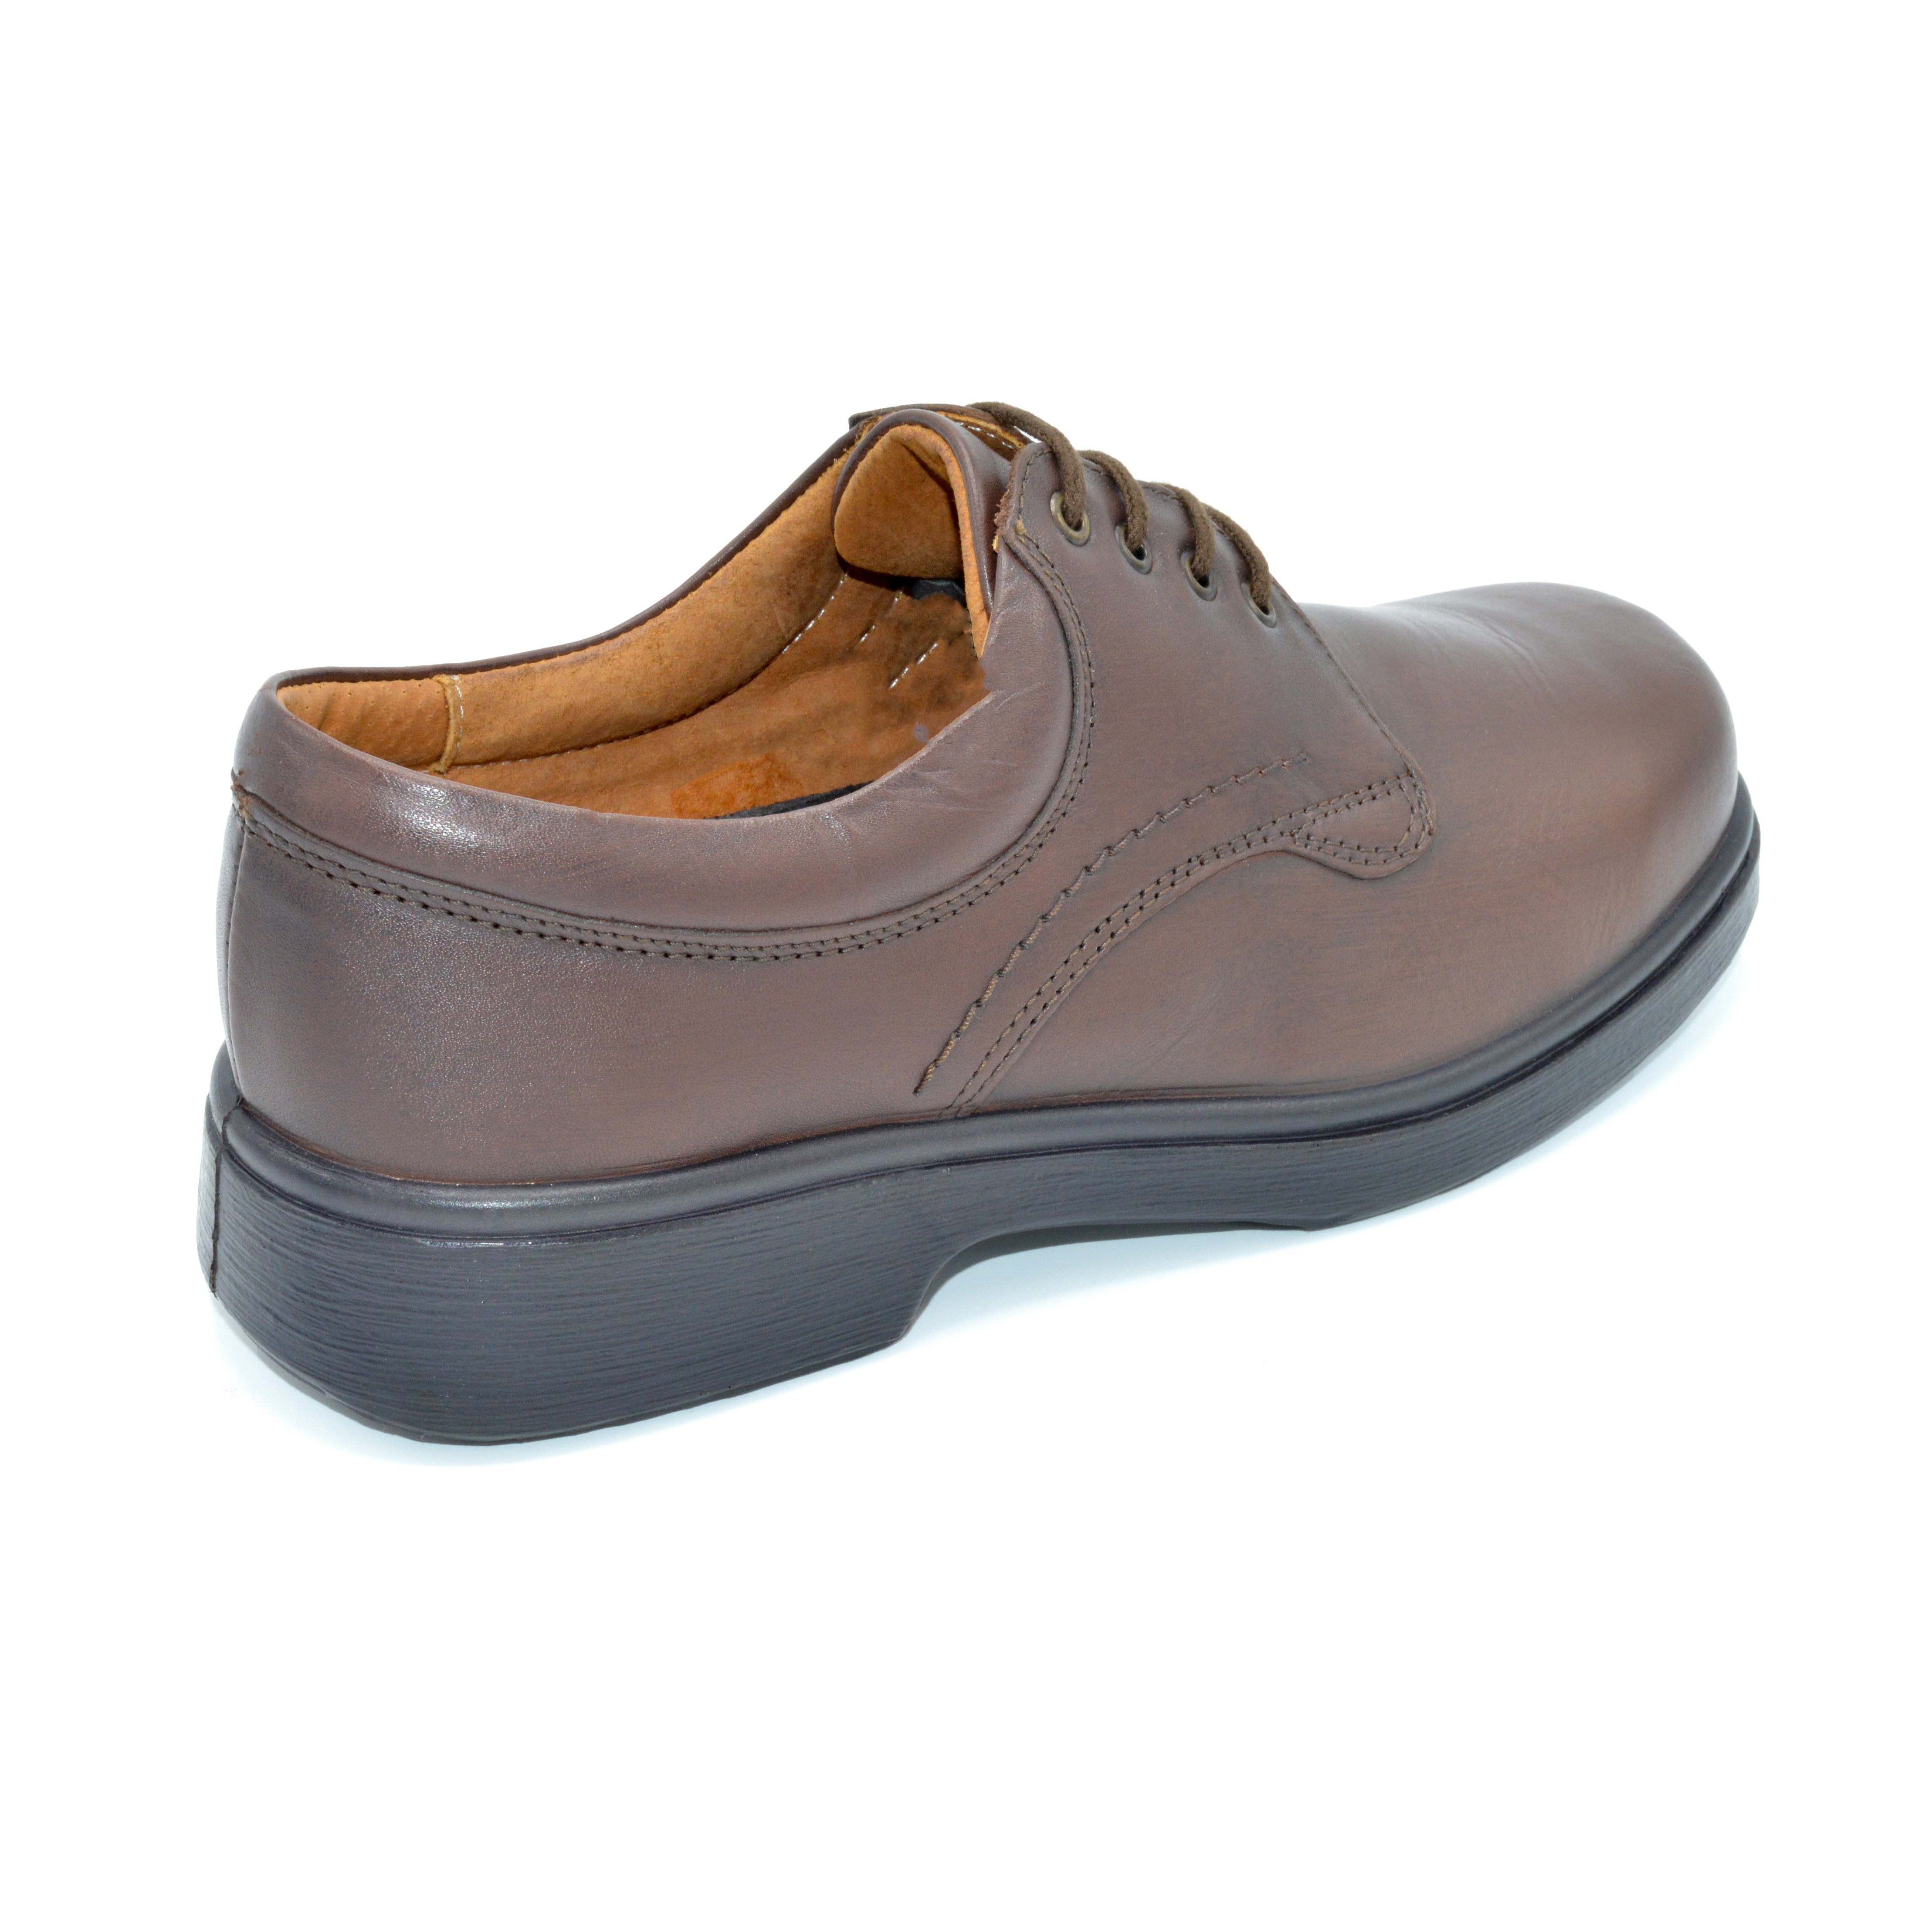 Comfortable Wider Fit Lace-Up Shoe For Bunions